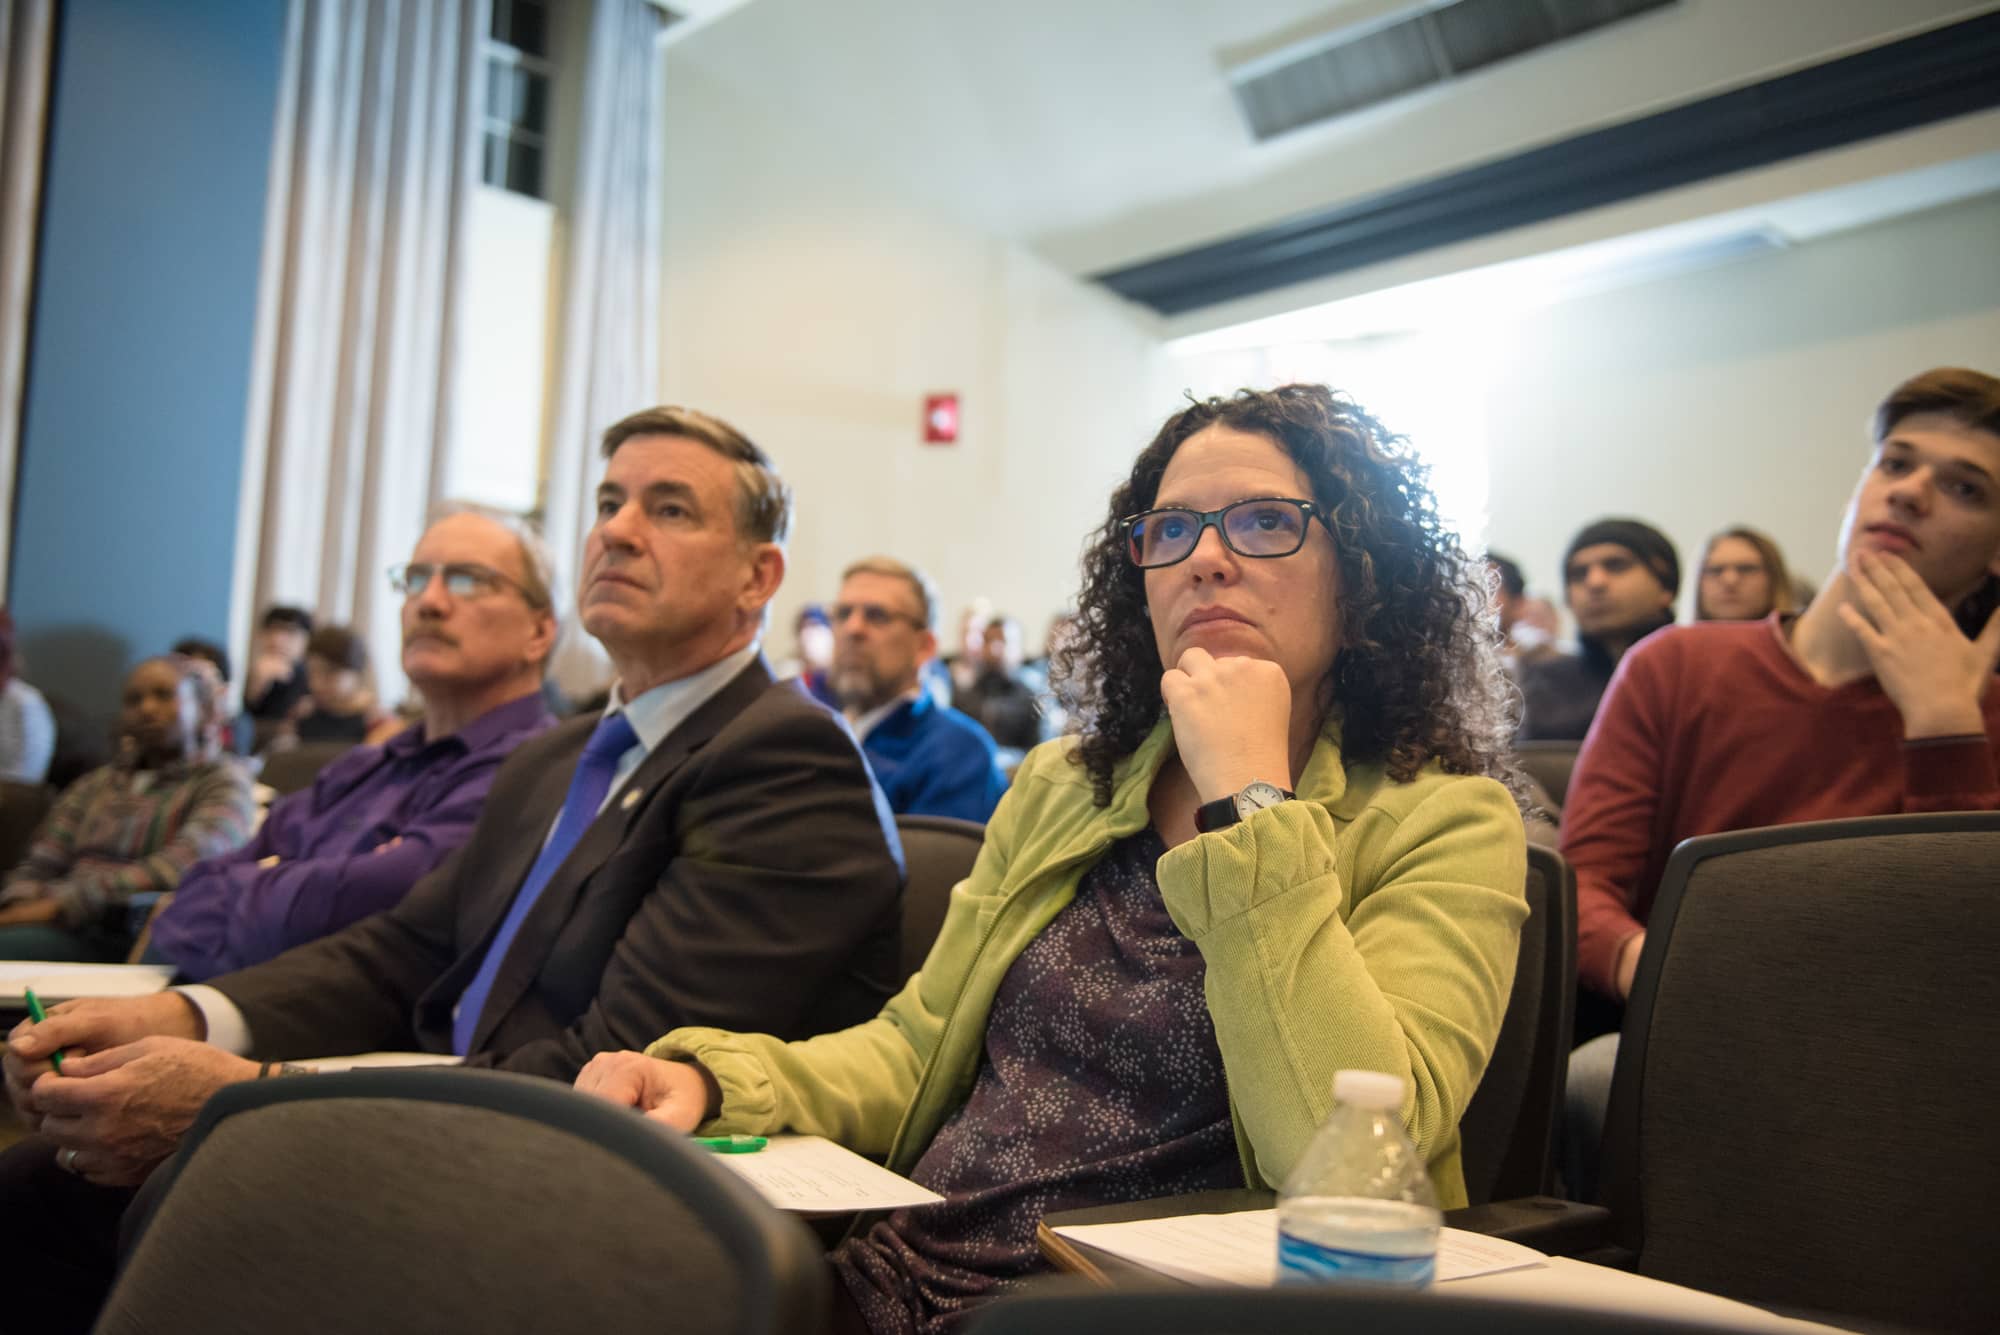 Faculty, staff and community members listen to Three Minute Thesis presentations at Stocker Center. 